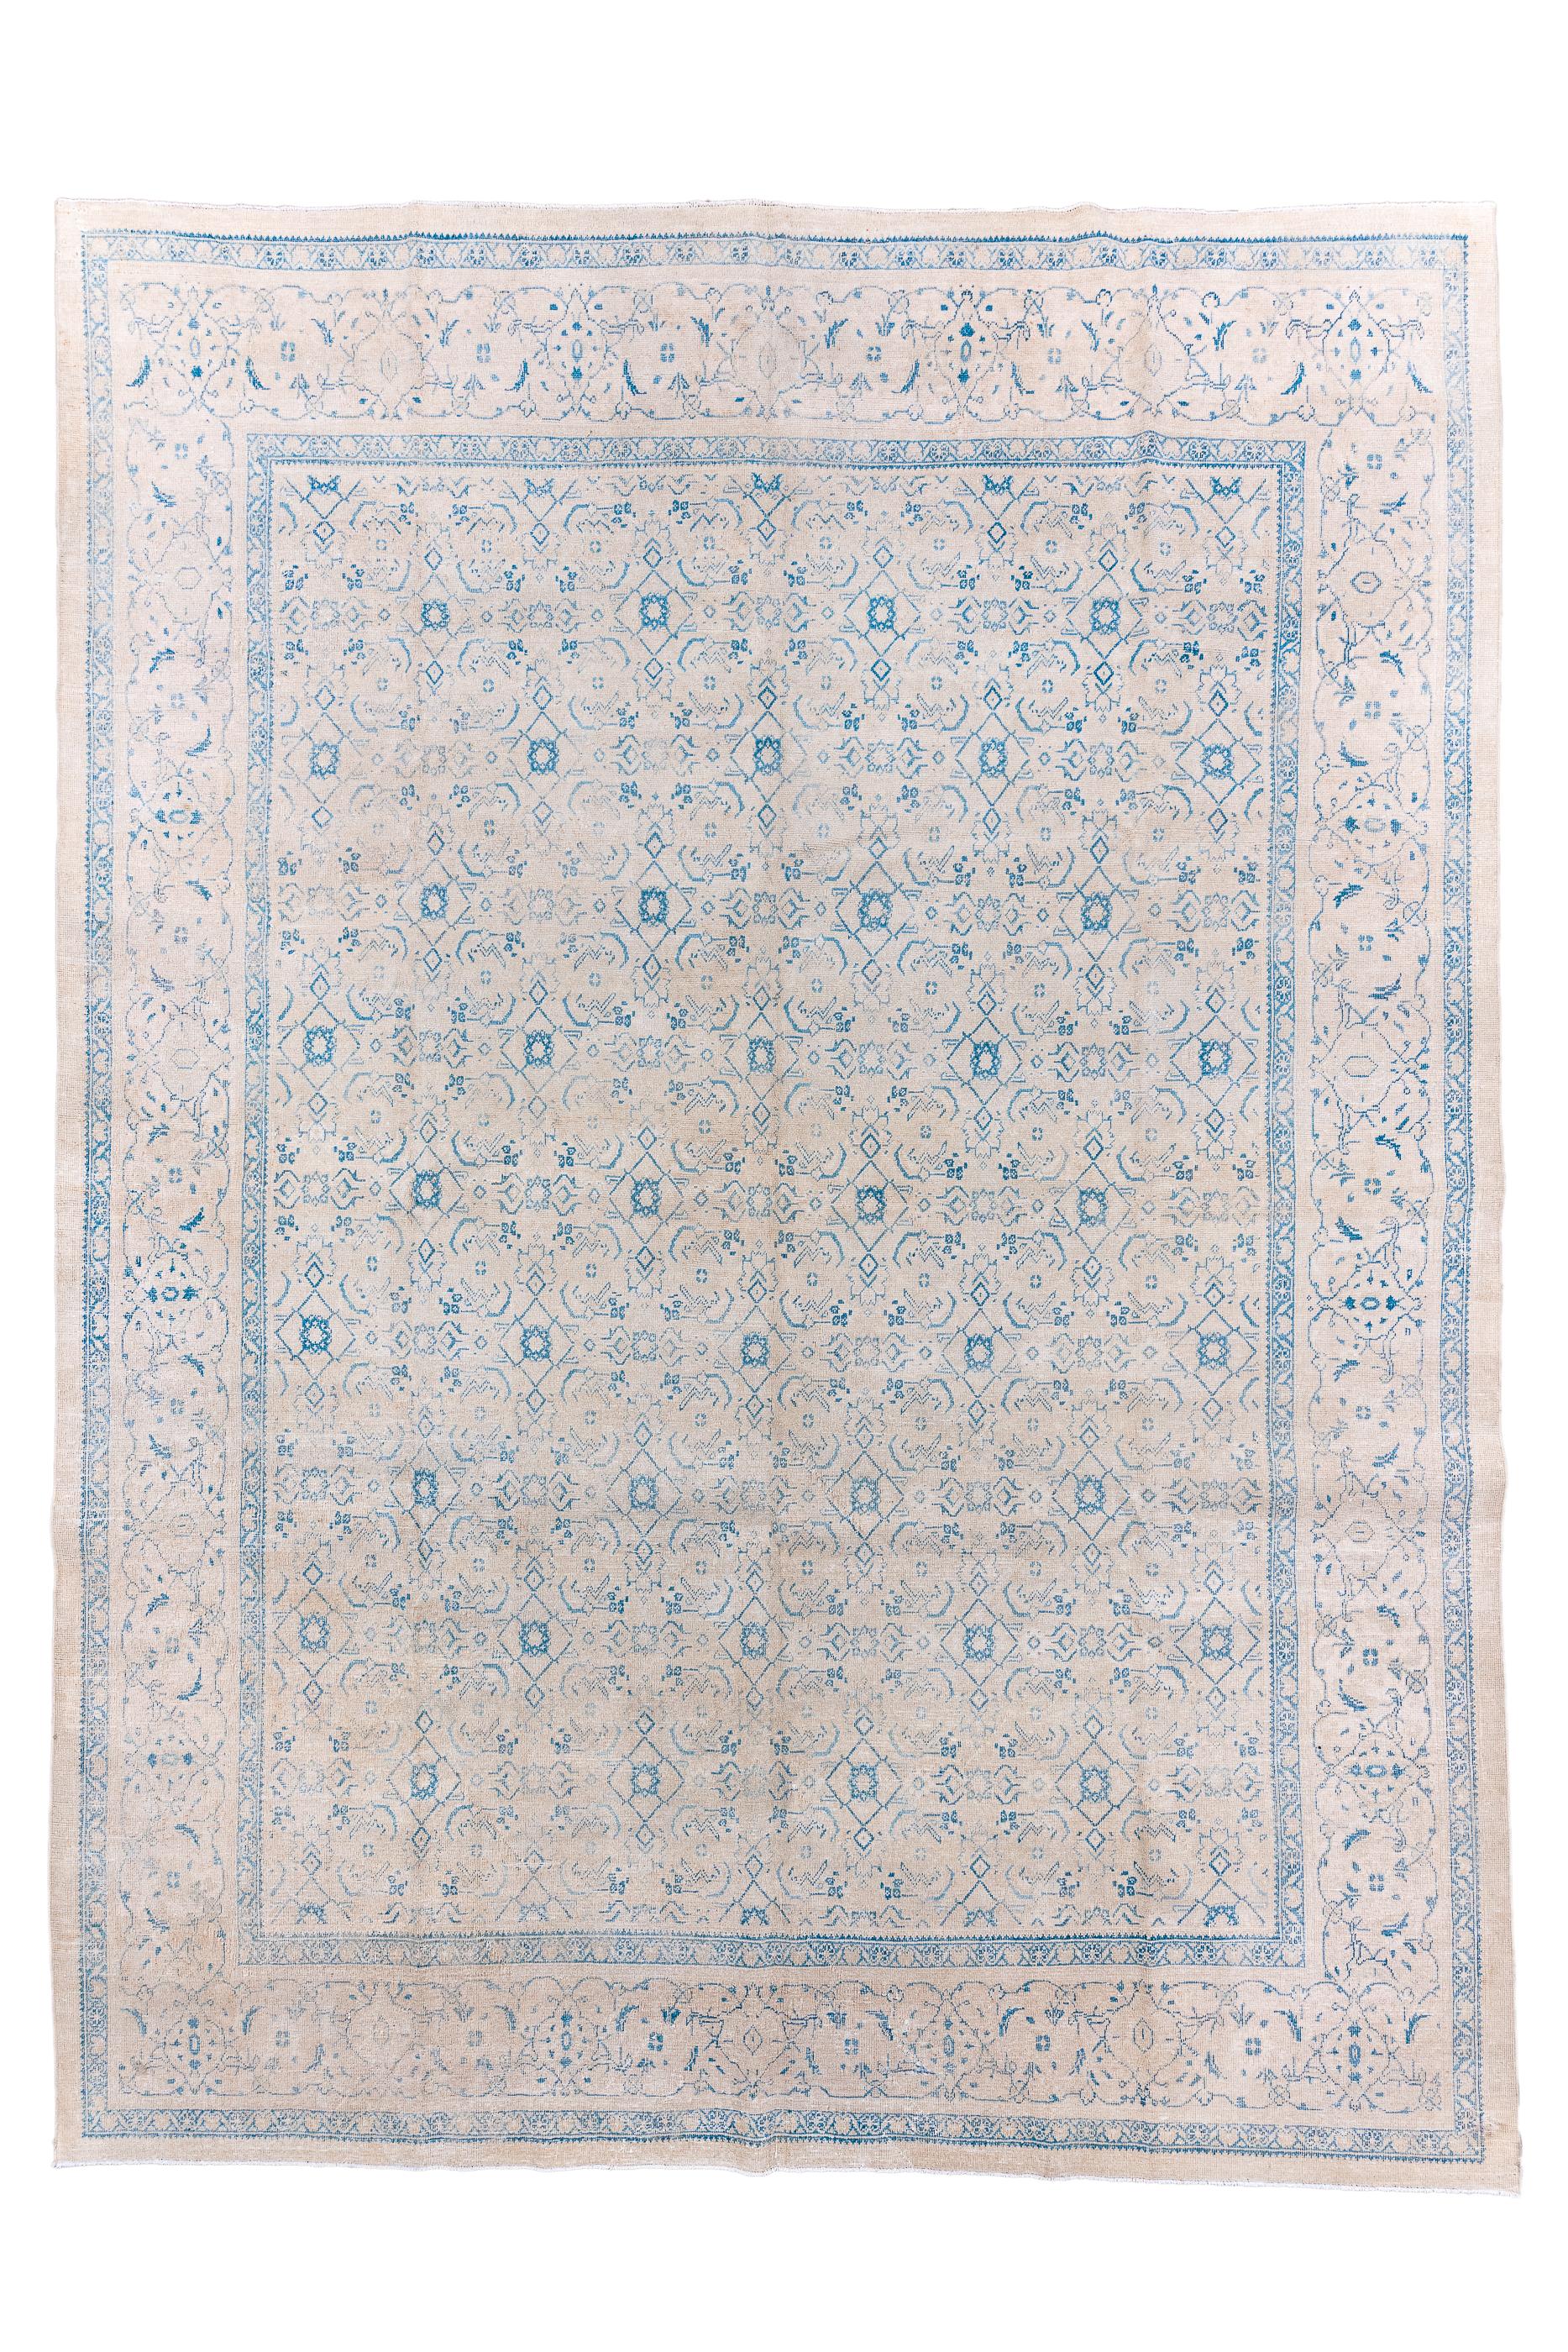 The soft buff field presents a small allover Herati design in blue with especially prominent offset rows of little rosettes. Light border of outline turtles trapped in a vine scrollerie. Plain tonally en suite outer surround. Moderate weave on